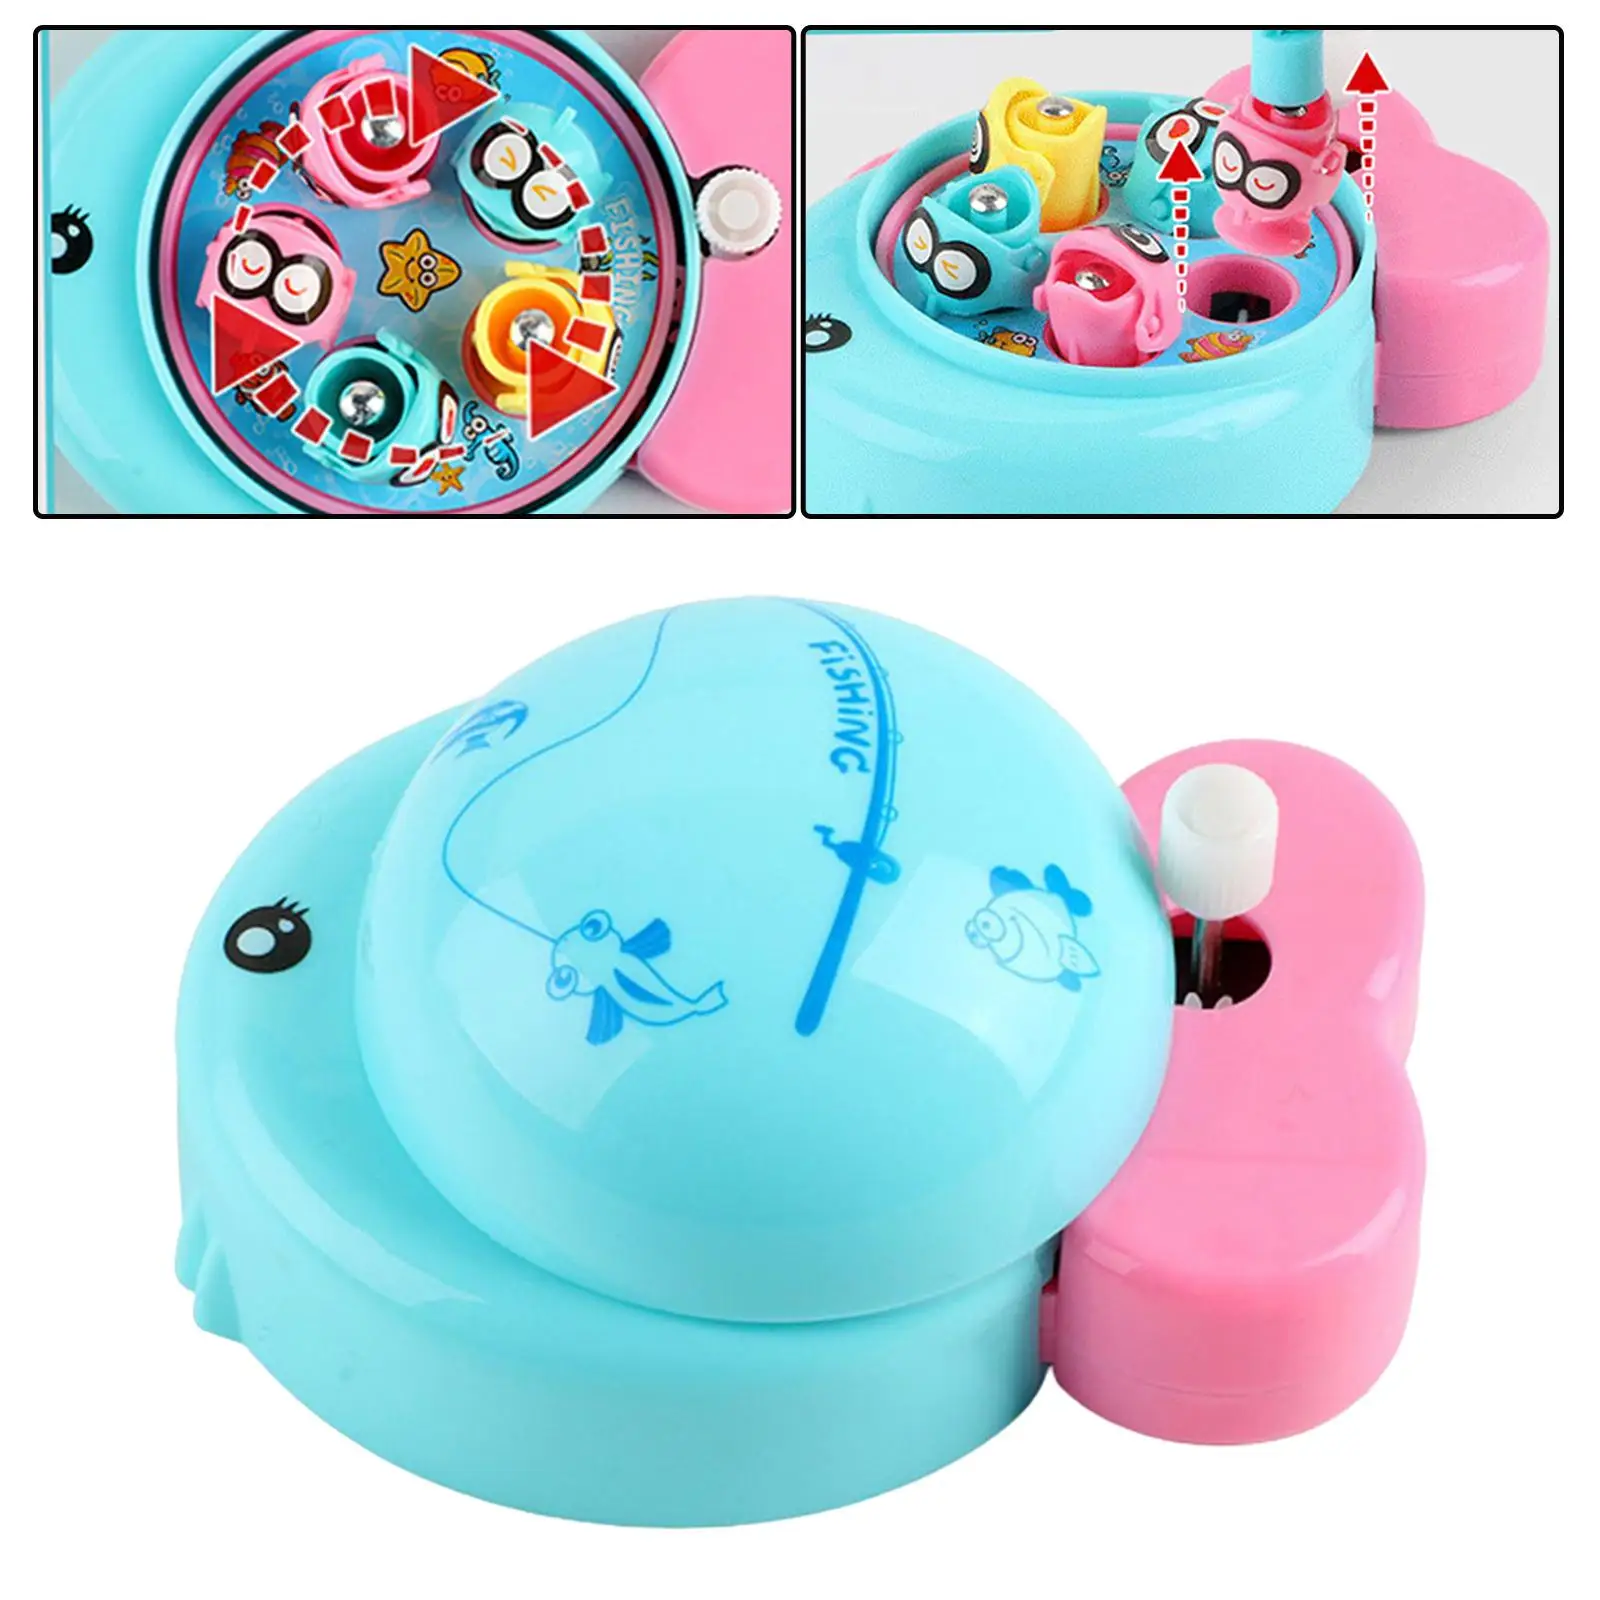 Fishing Toy Preschool Learning Interactive Toys Clock Toy for 3 4 5 Year Old